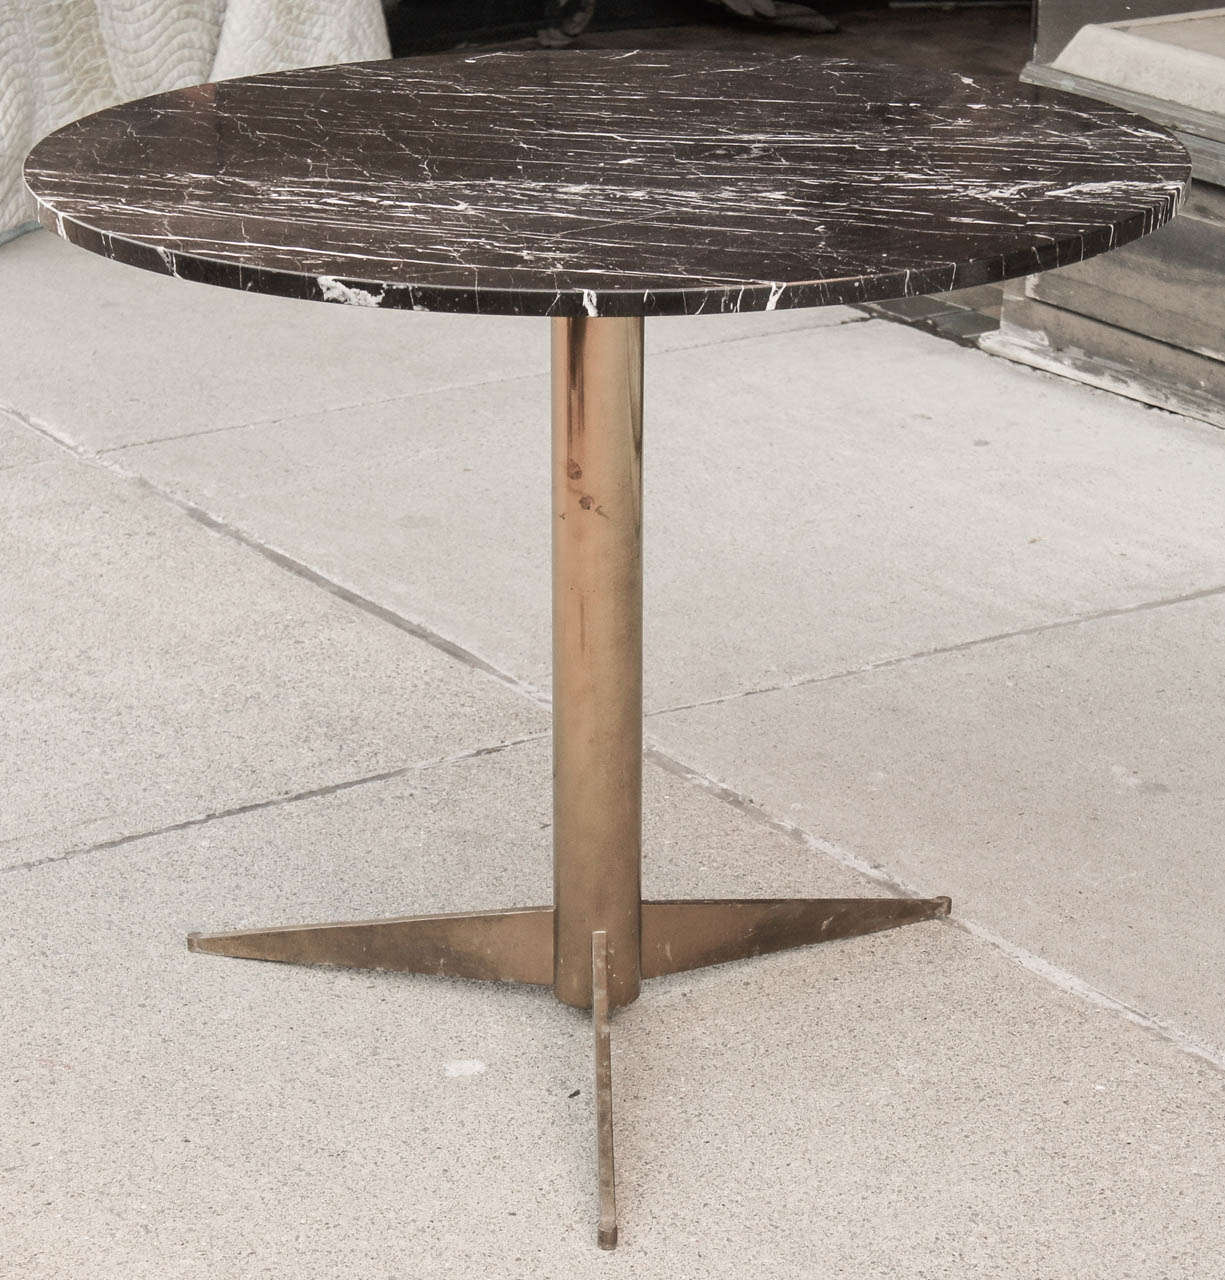 This lovely simple gueridon or small table is from the 70's and was part of a  decorative scheme done circa 1975 for a single owner home in that decade. The table is made from cast brass with iron inner supports for strength. The top is of Coda